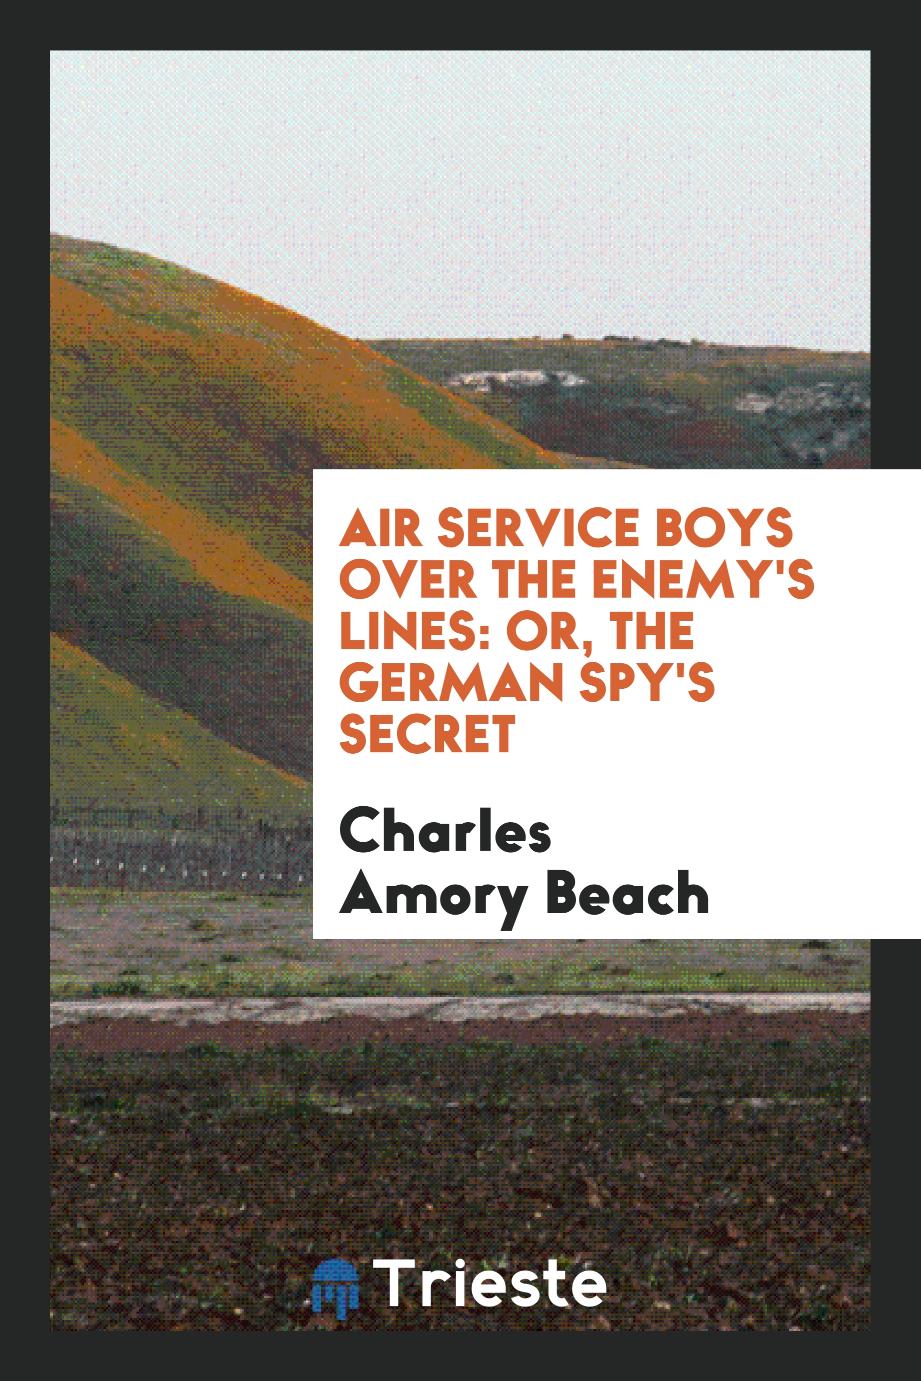 Air Service Boys over the Enemy's Lines: Or, the German Spy's Secret